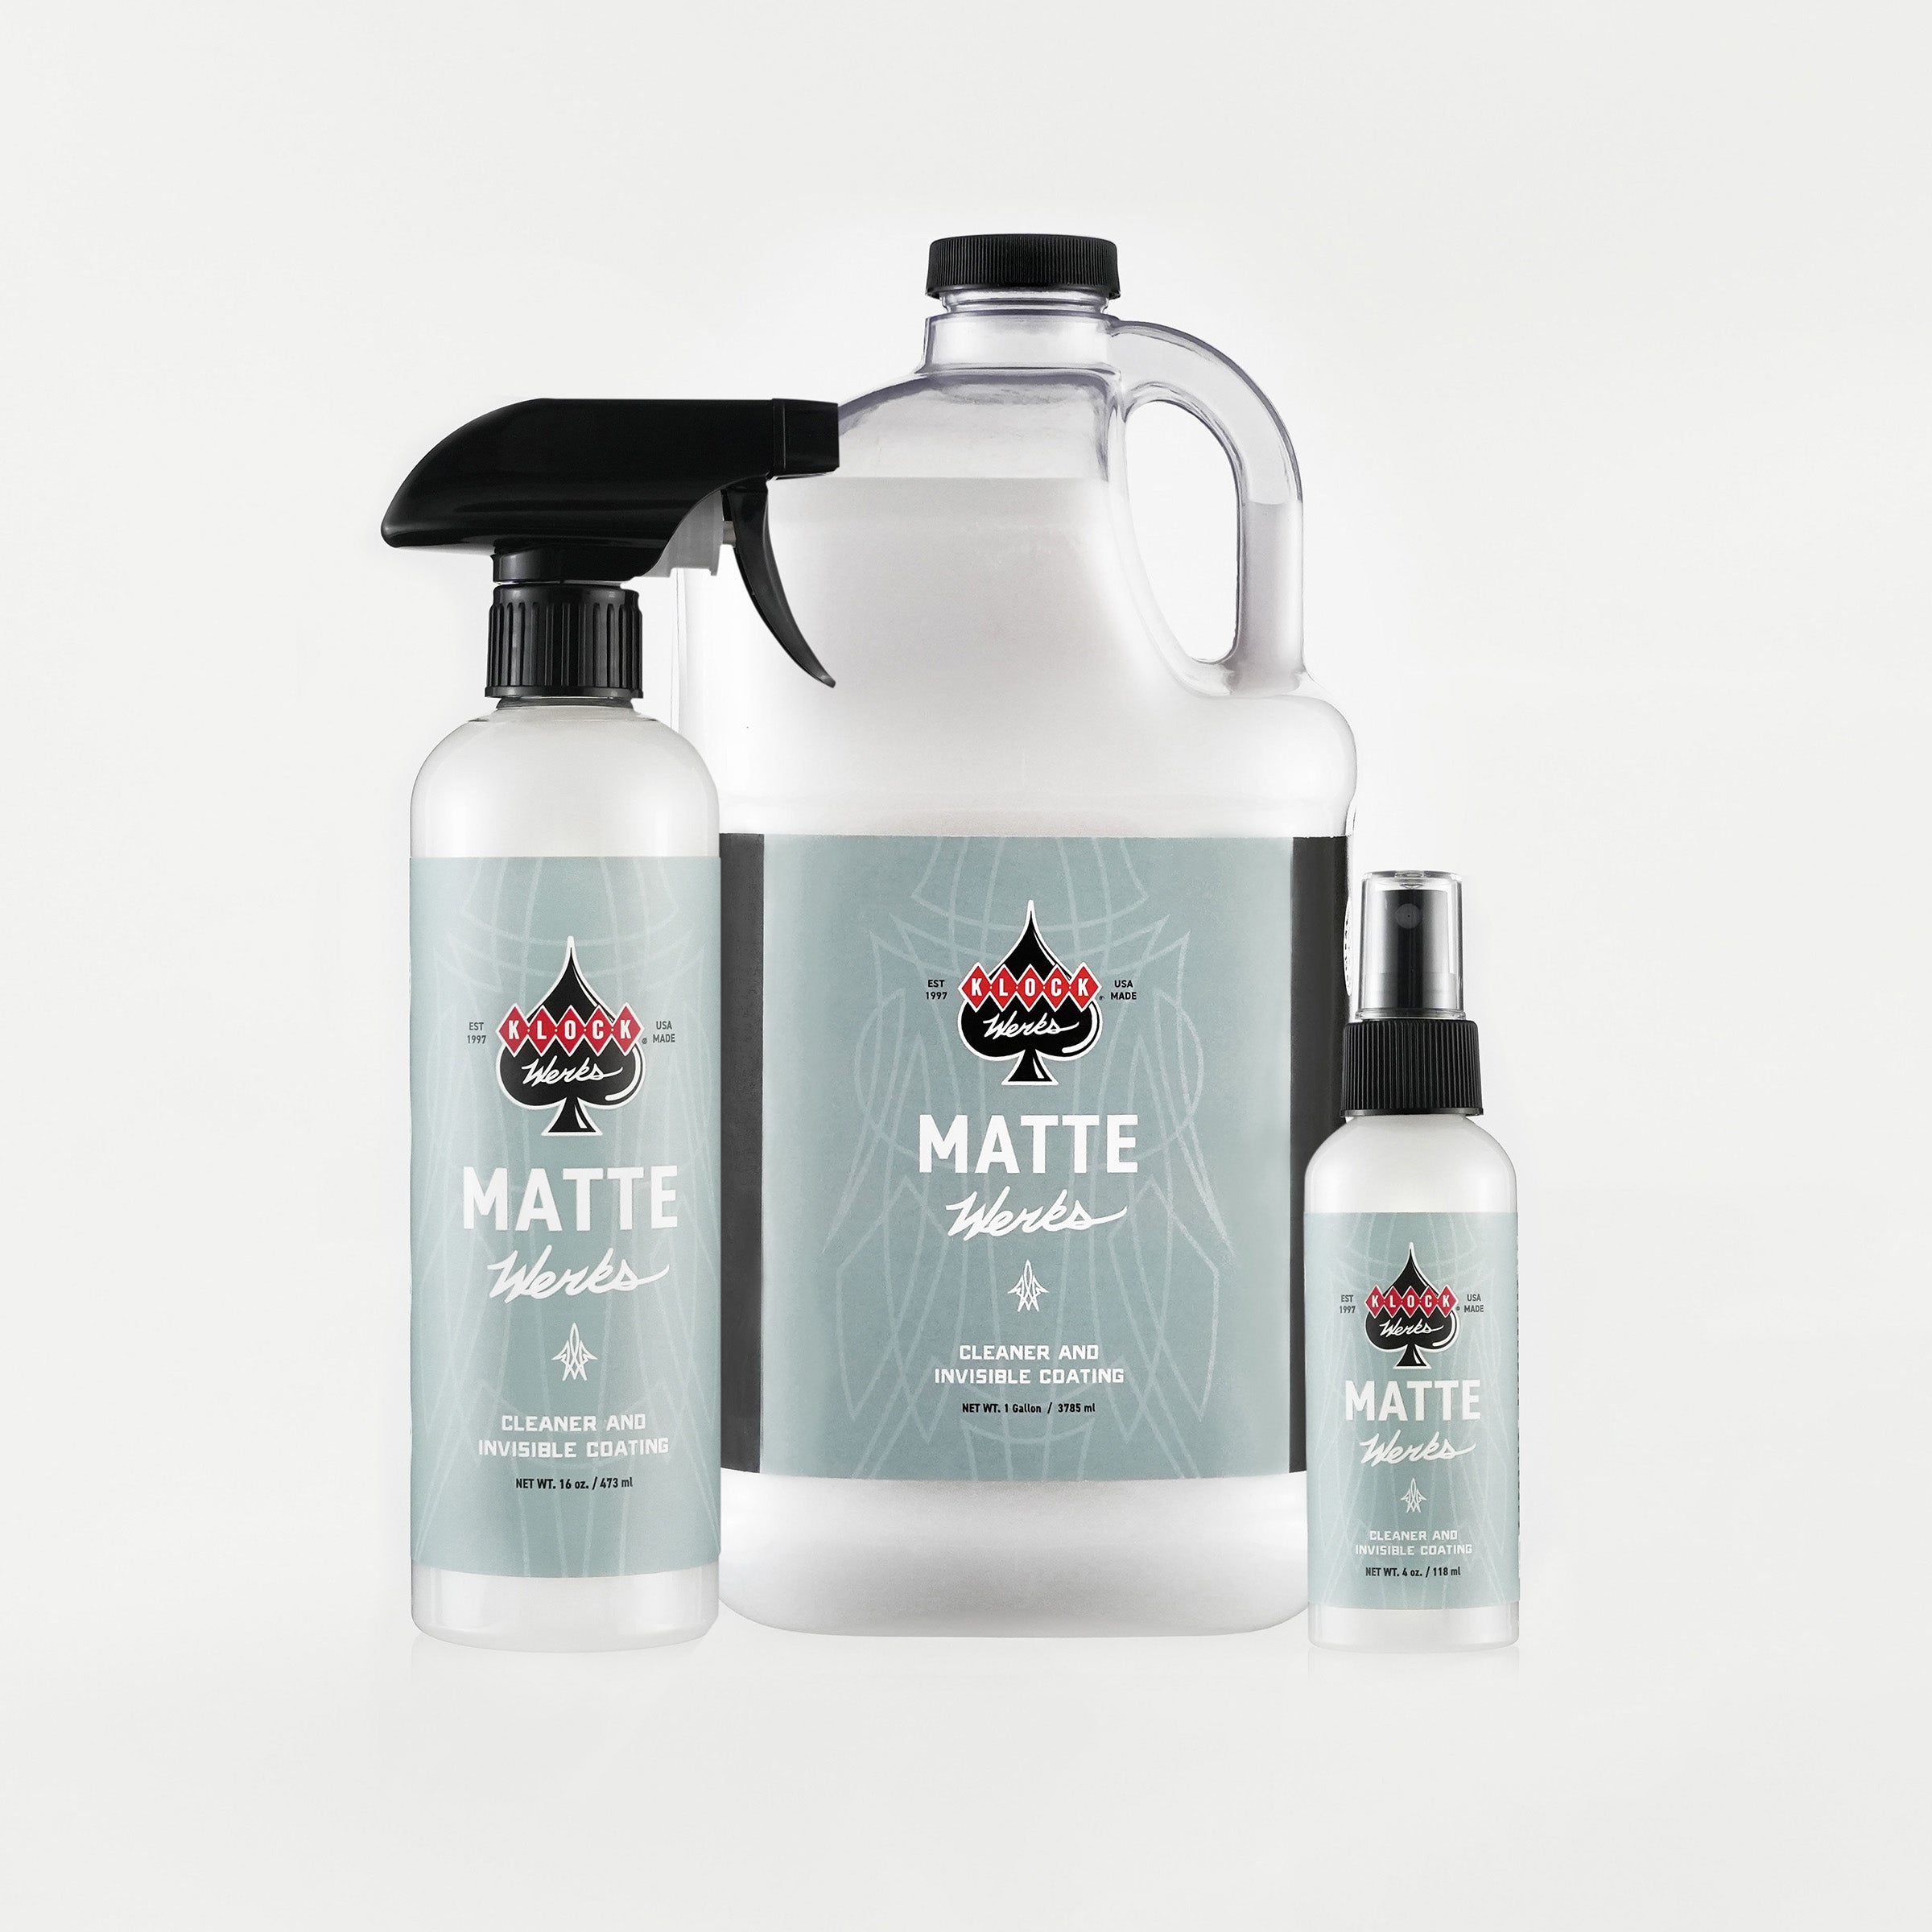 Matte Werks Cleaning Product complete lineup(The Complete Matte Werks Lineup)